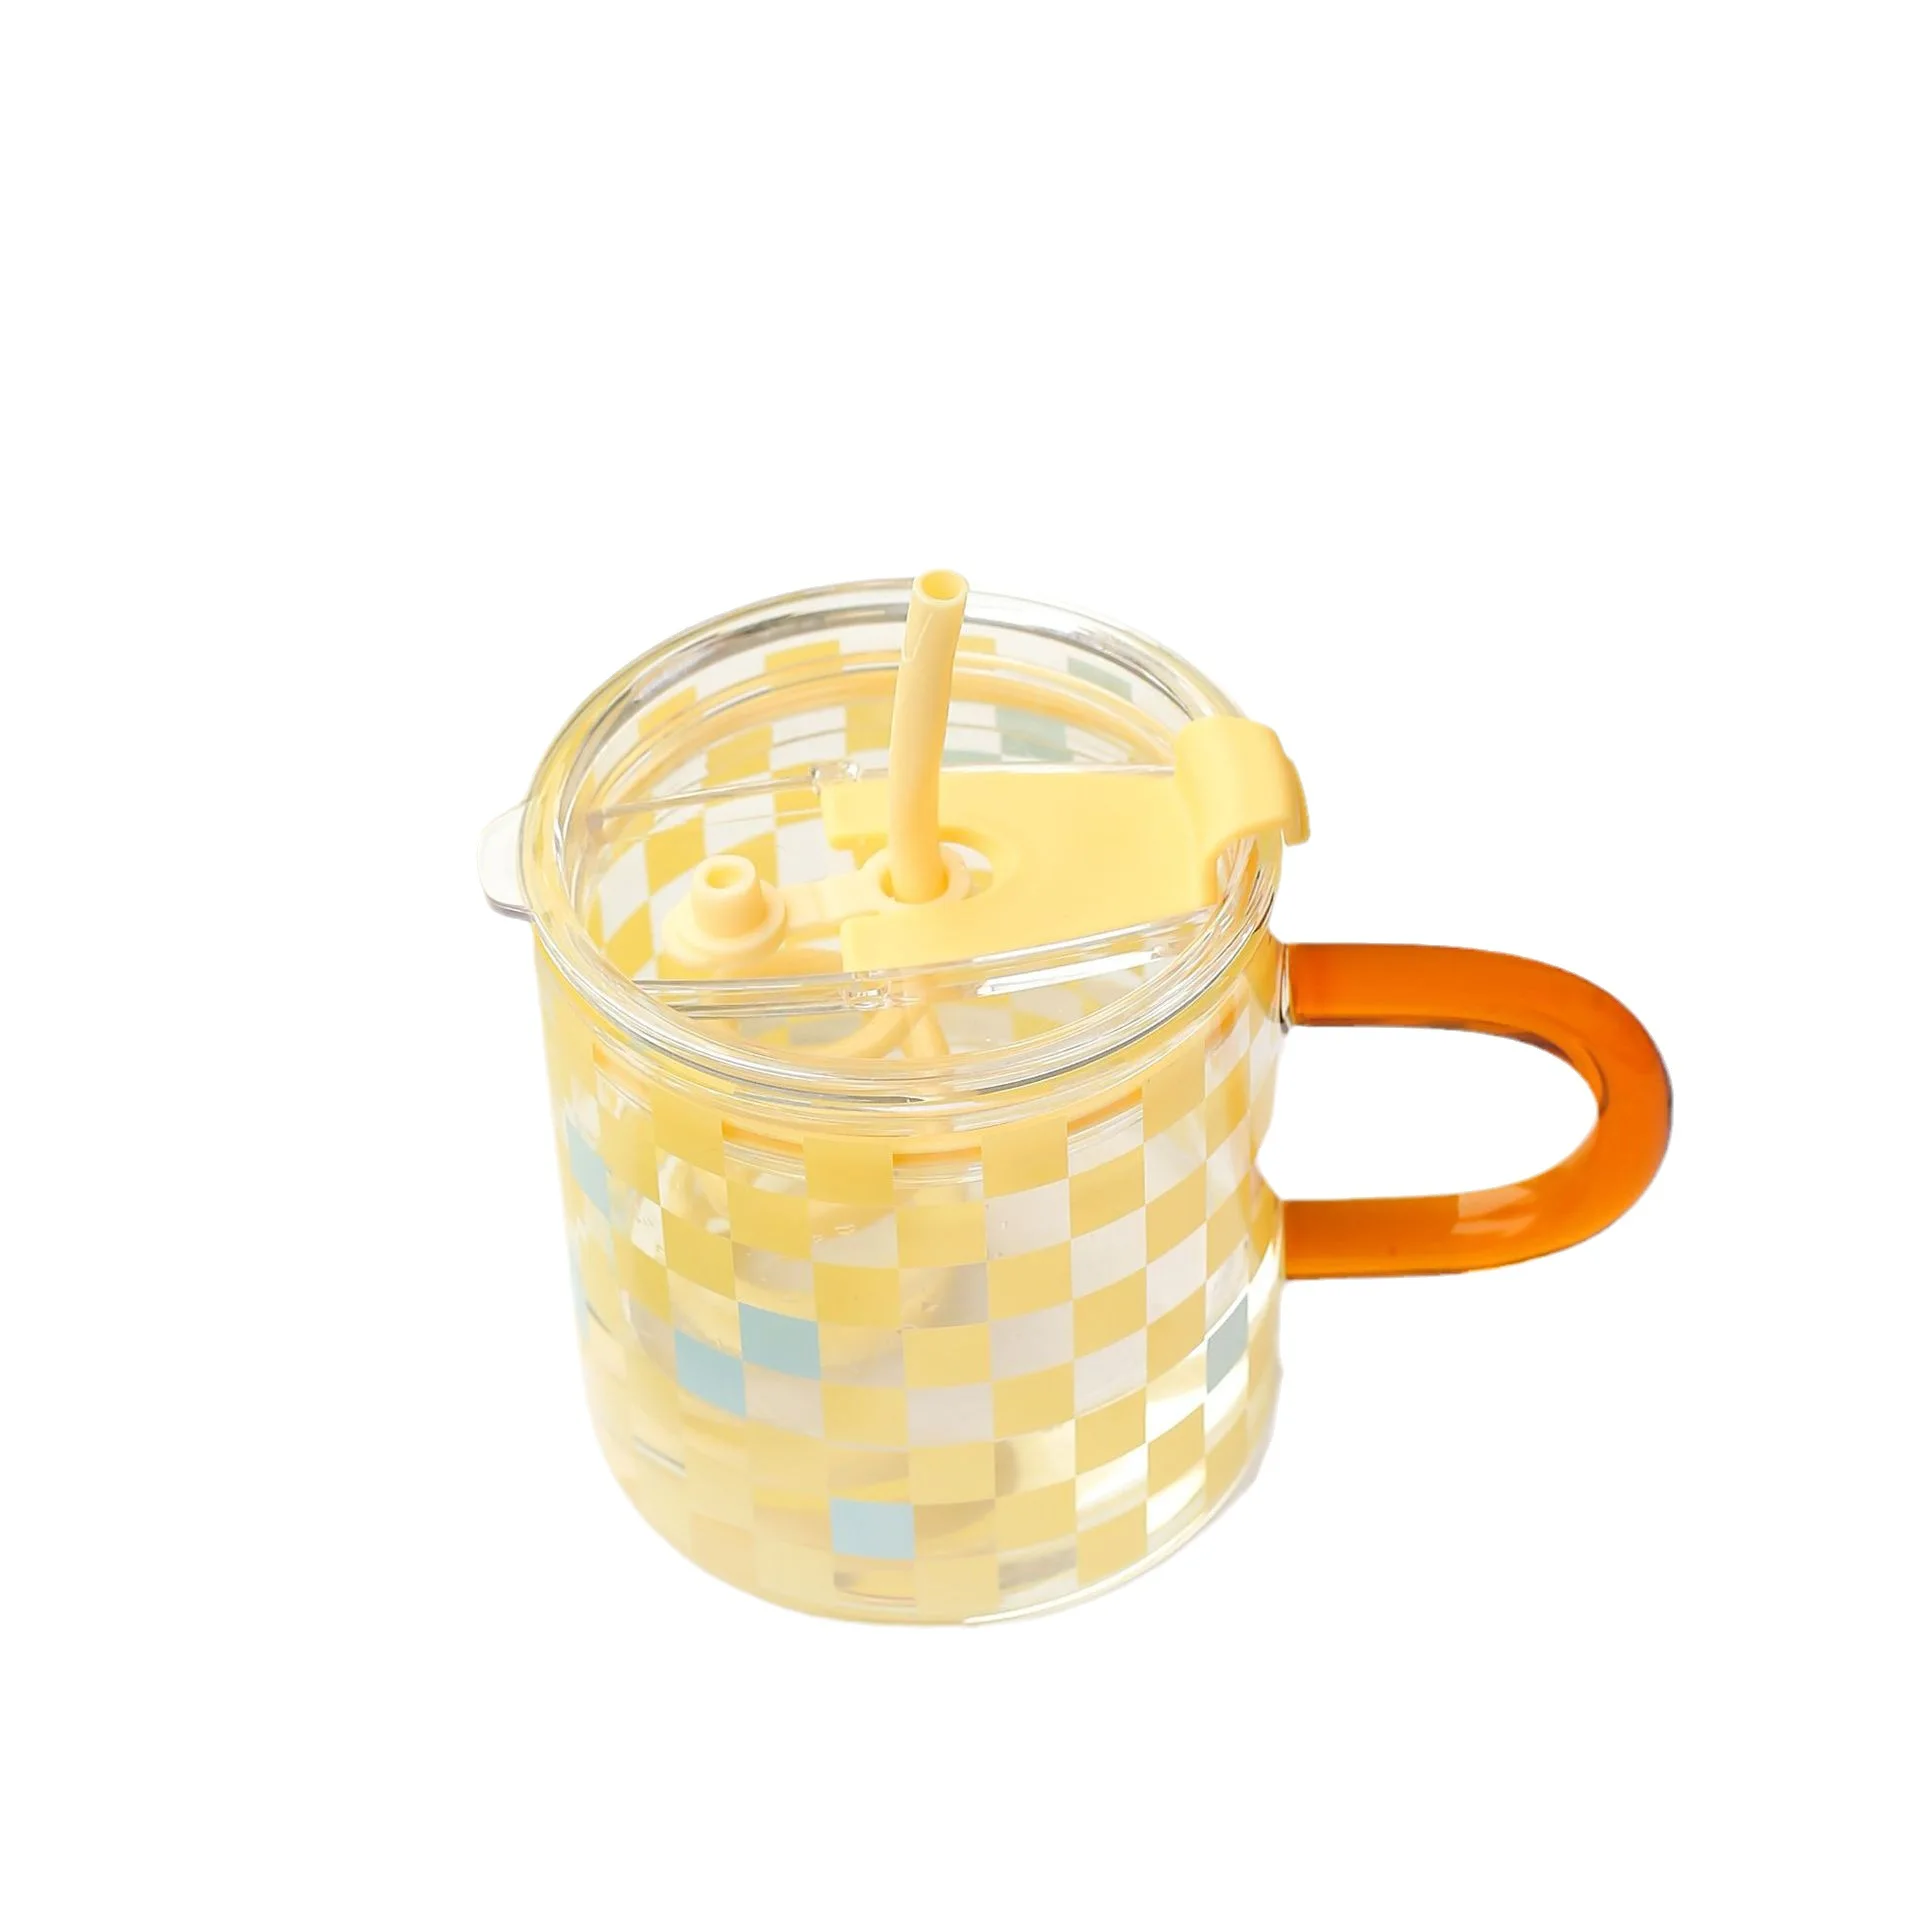 Checkerboard handle cup colorful high boron heat-resistant glass cup  glassware tumblers large-capacity  with handle and straw